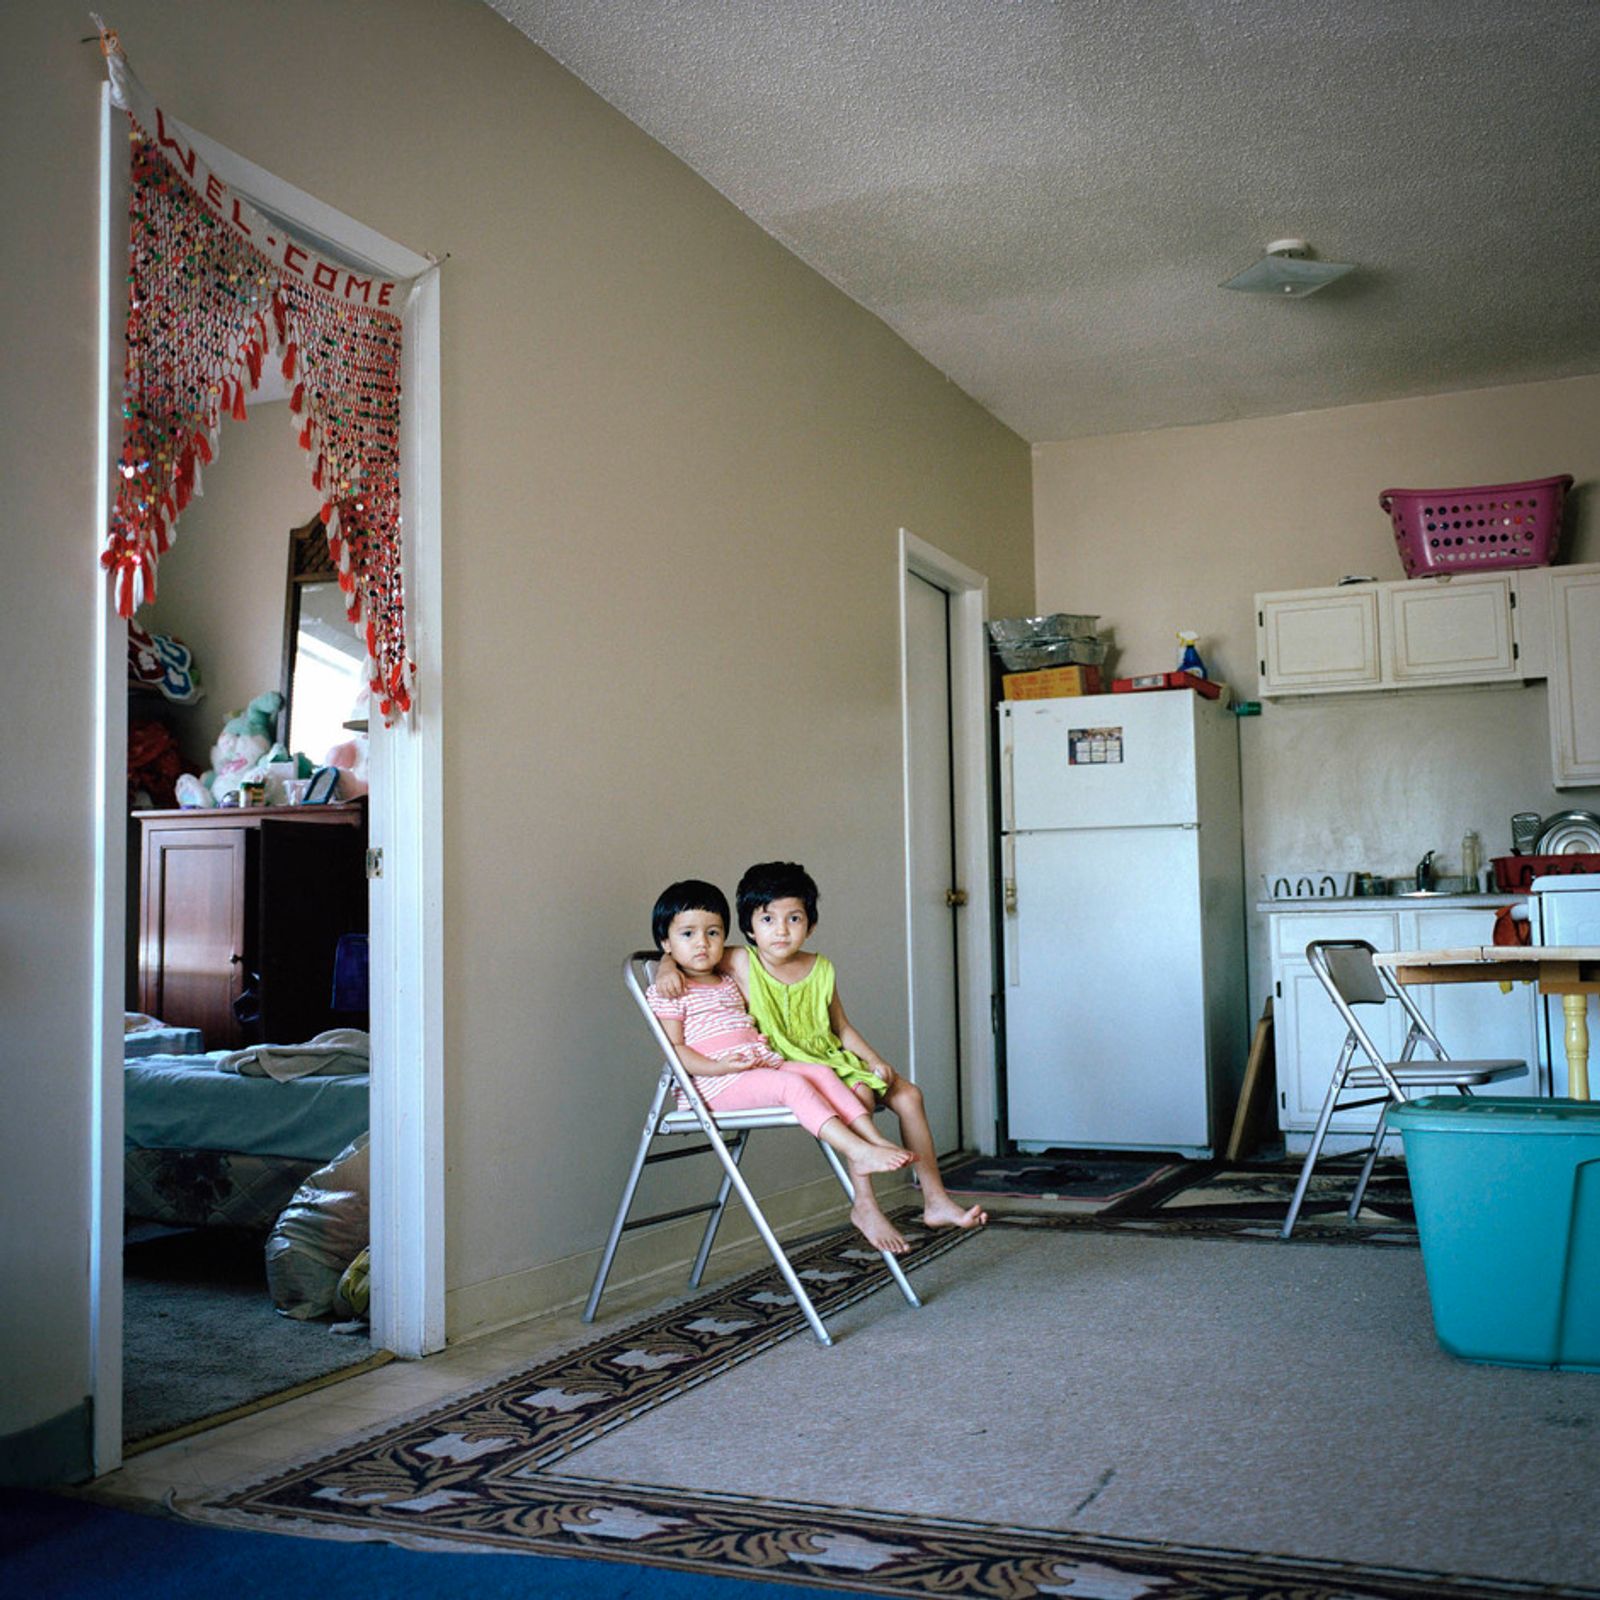 © Selma Fernandez Richter - Image from the The Ache for Home  photography project